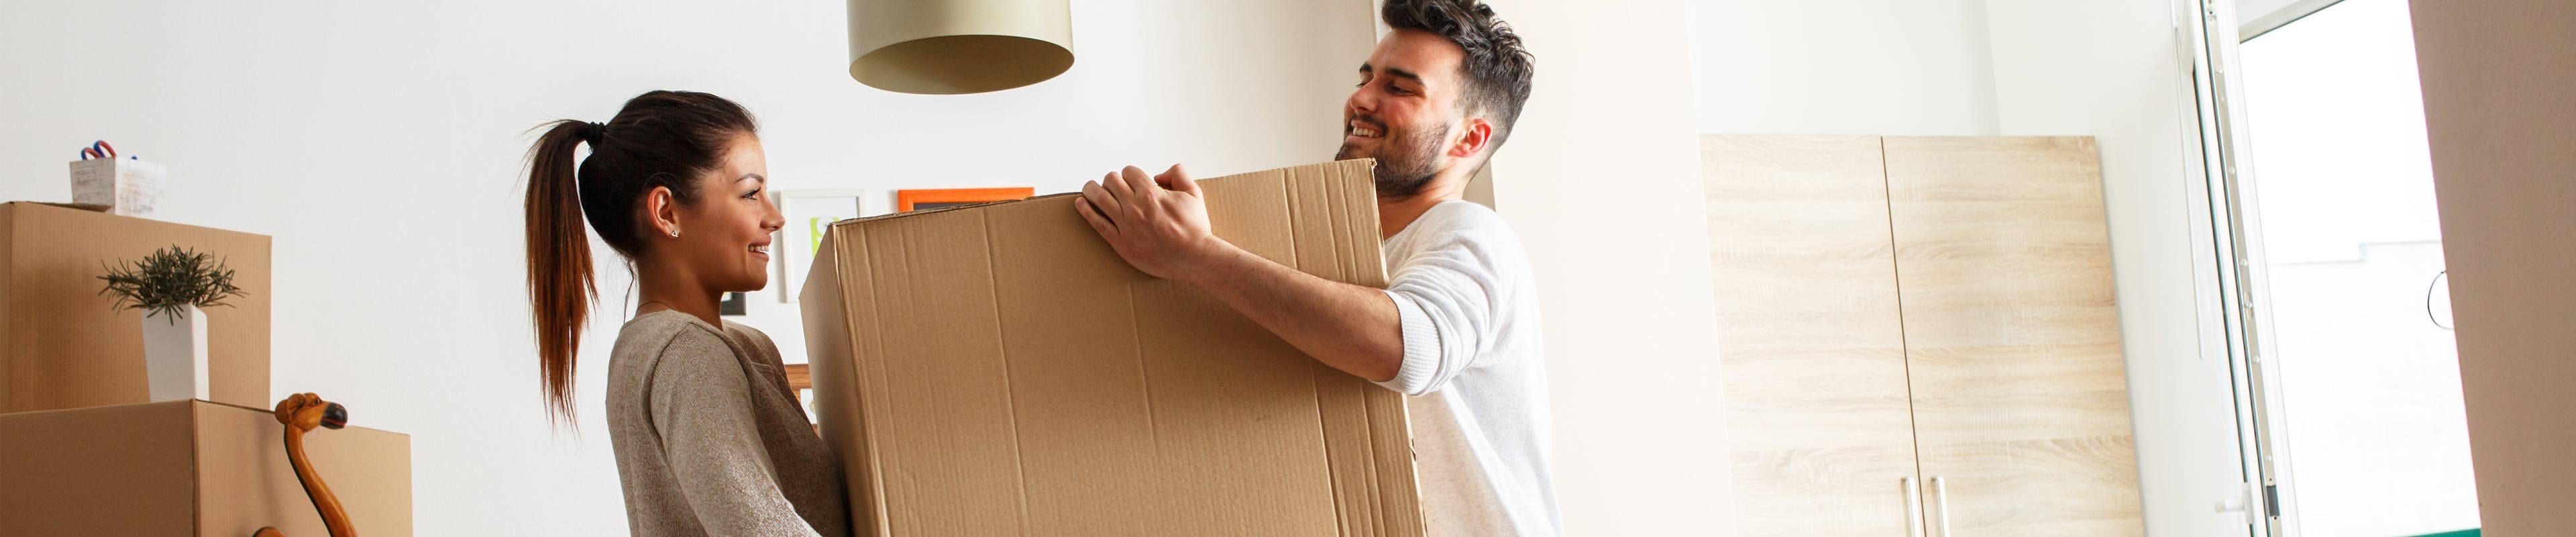 Young couple moving boxes into home